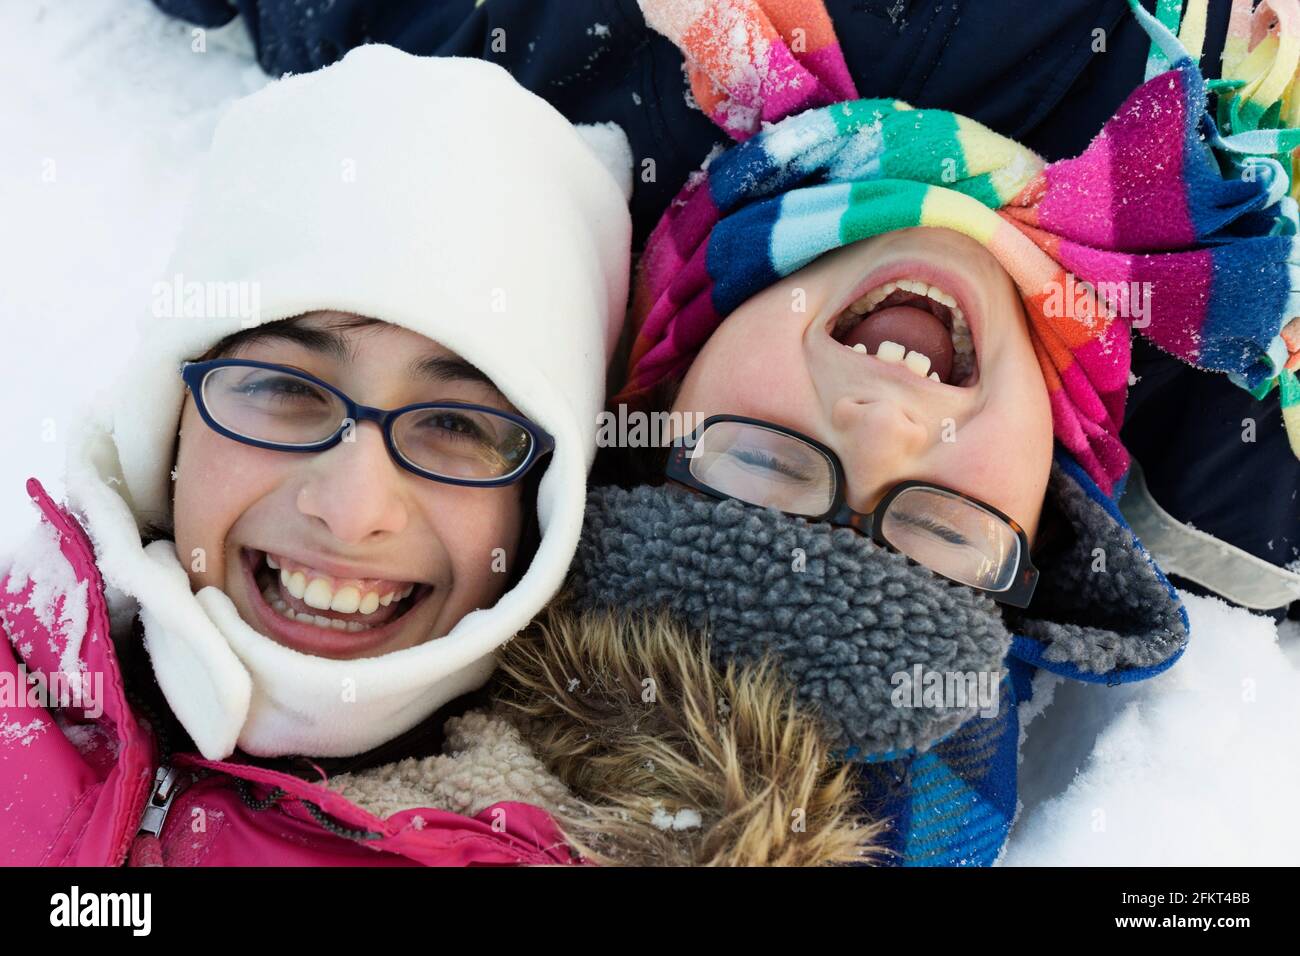 Boy and girl wearing winter hats and glasses, laughing Stock Photo